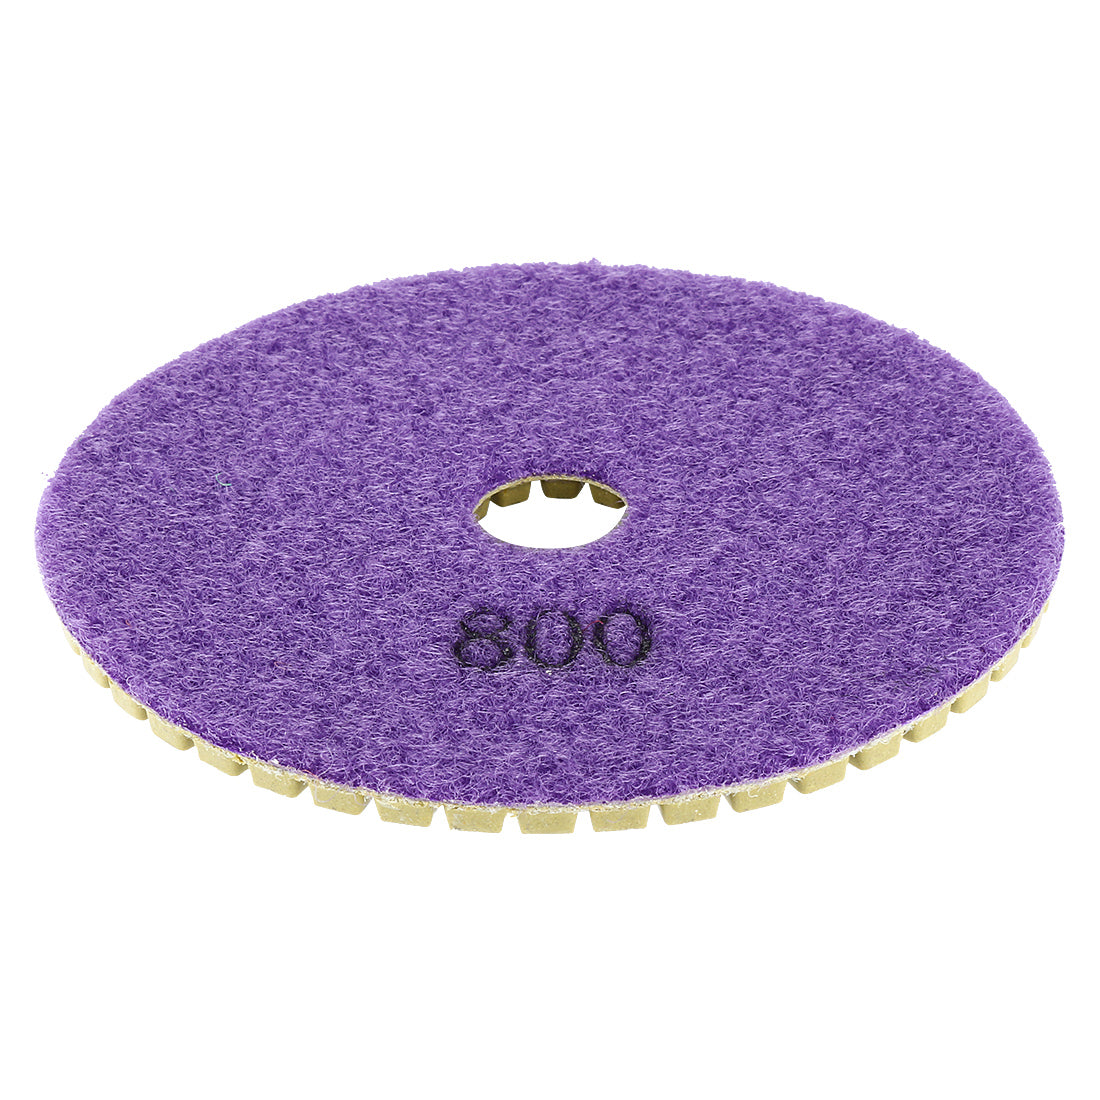 uxcell Uxcell 4" Diamond Wet Polishing Pad Grit 800 10pcs for Granite Concrete Marble